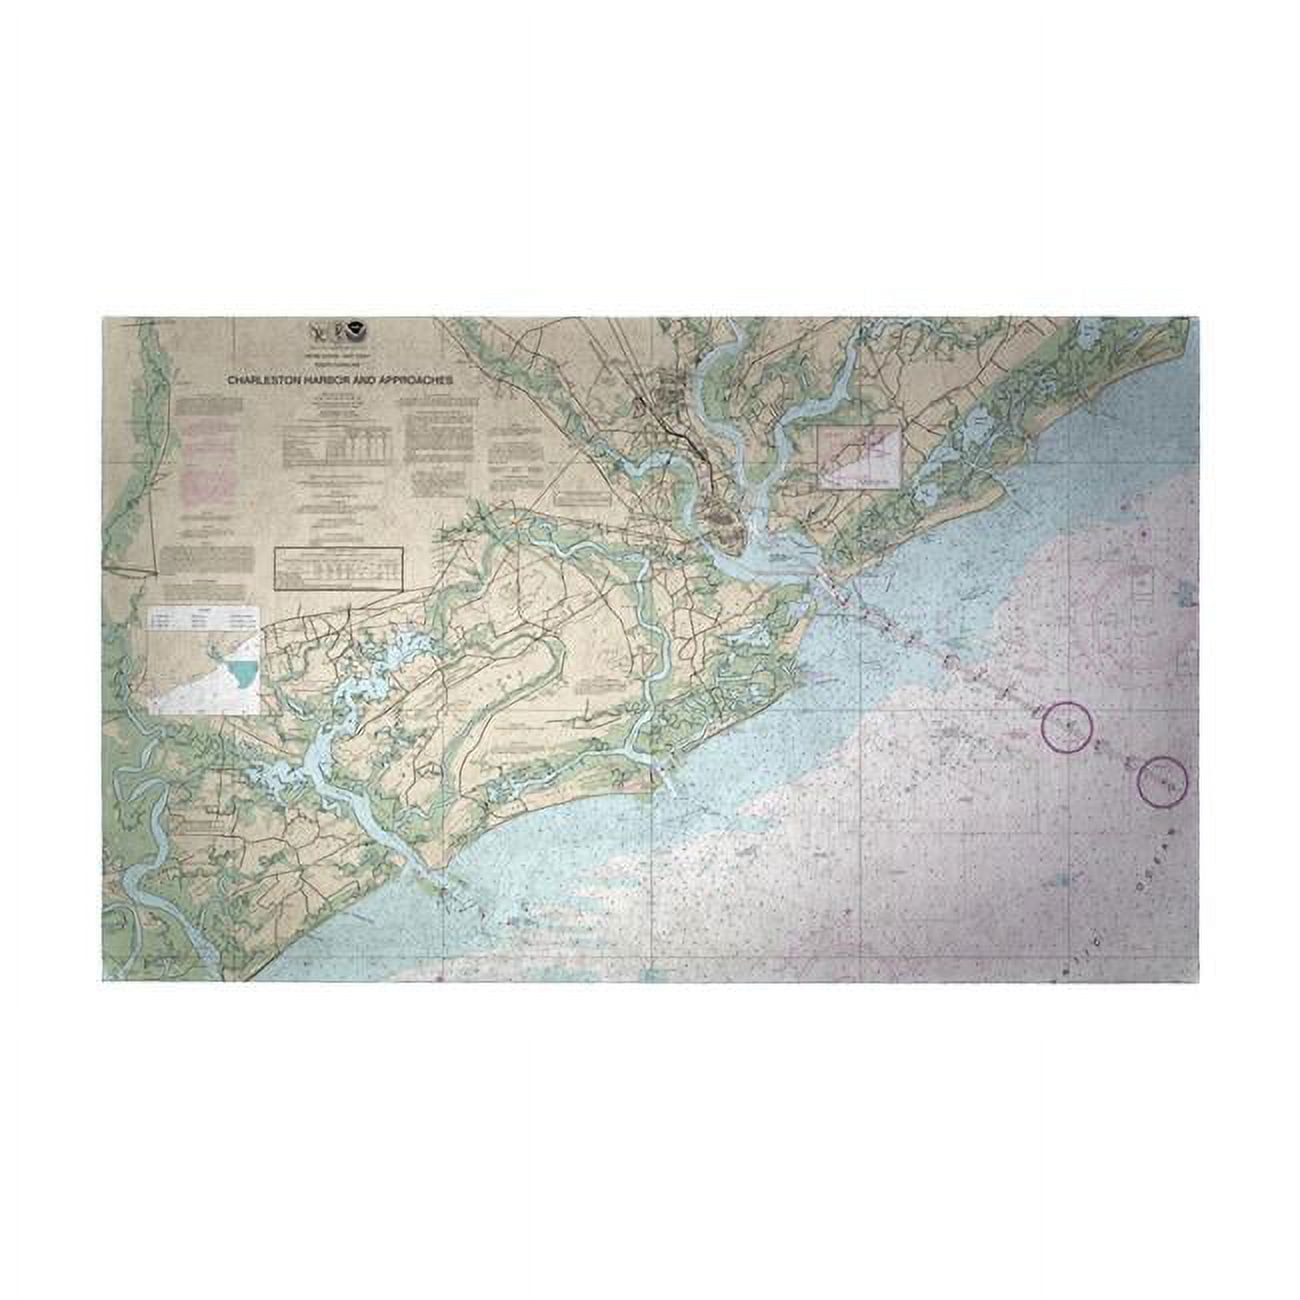 DM11521G 30 x 50 in. Charleston Harbor & Approaches, SC Nautical Map Large Door Mat -  Betsy Drake